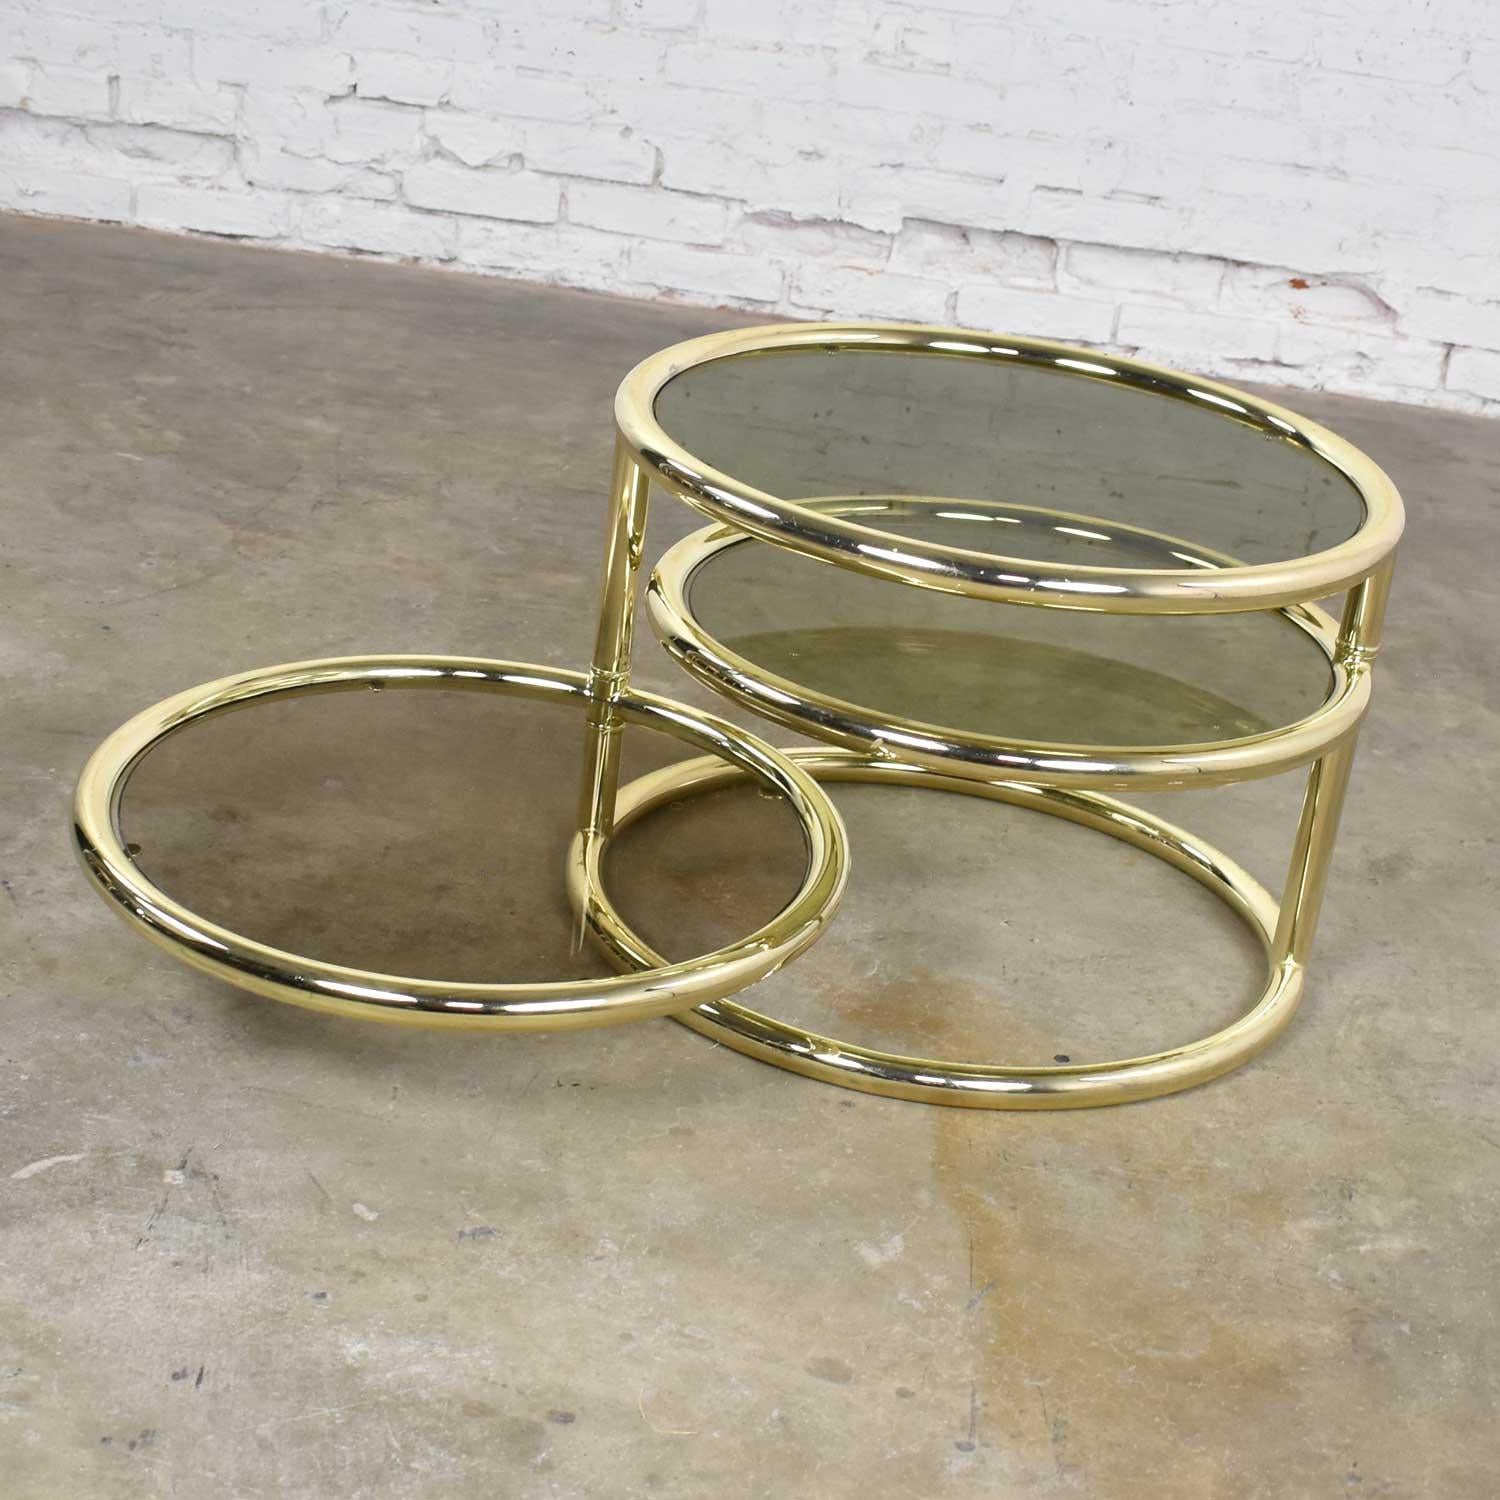 American Modern Round Brass & Smoke Glass End Table or Coffee Table with Pivoting Tiers